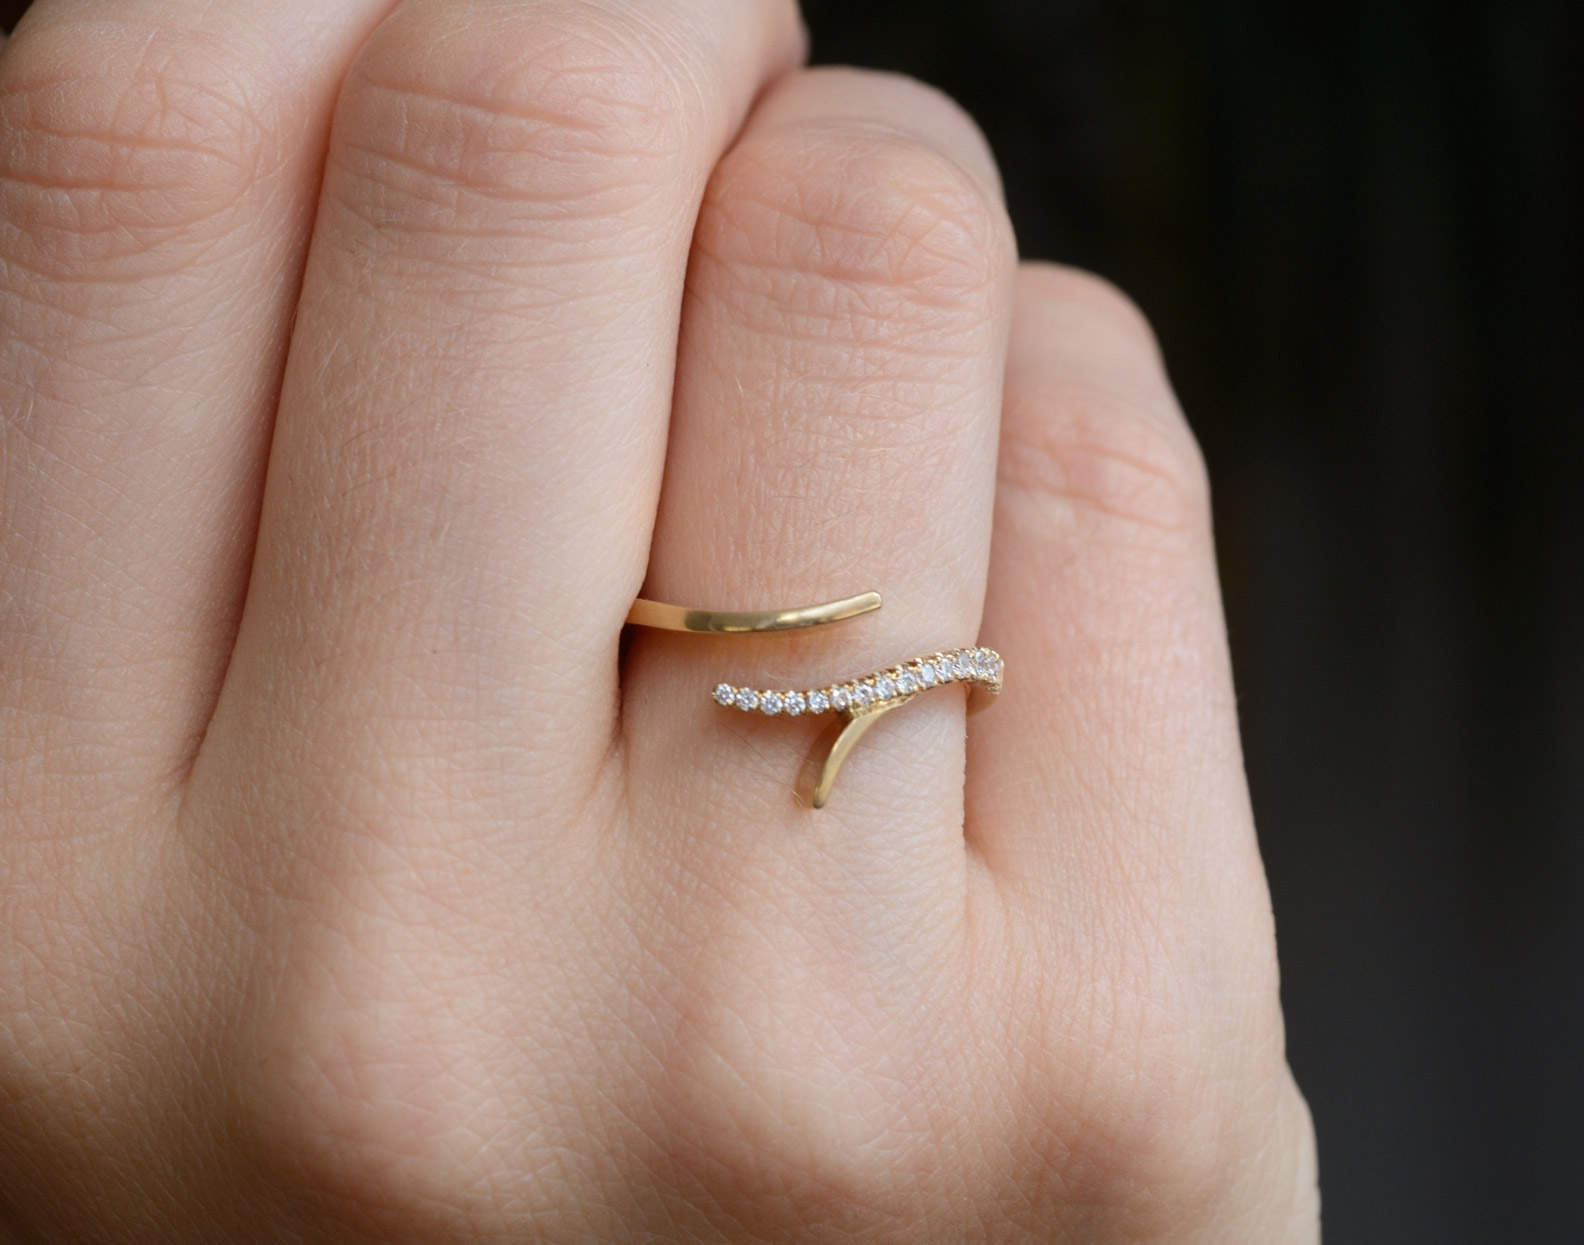 Forked yellow gold and diamond ring on hand